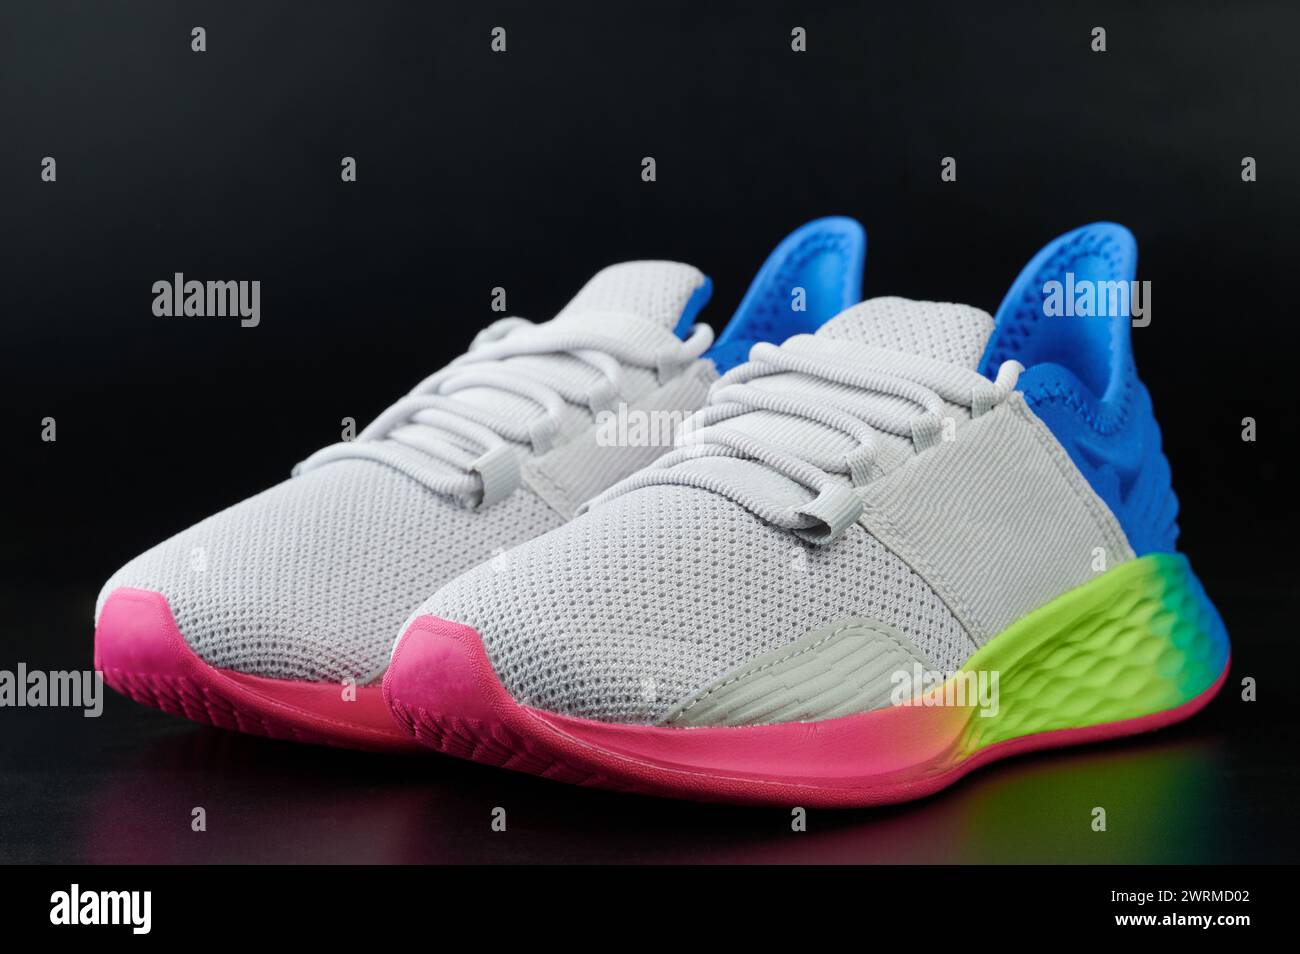 Sport footwear theme. Gray running shoes with rainbow colorful sole Stock Photo